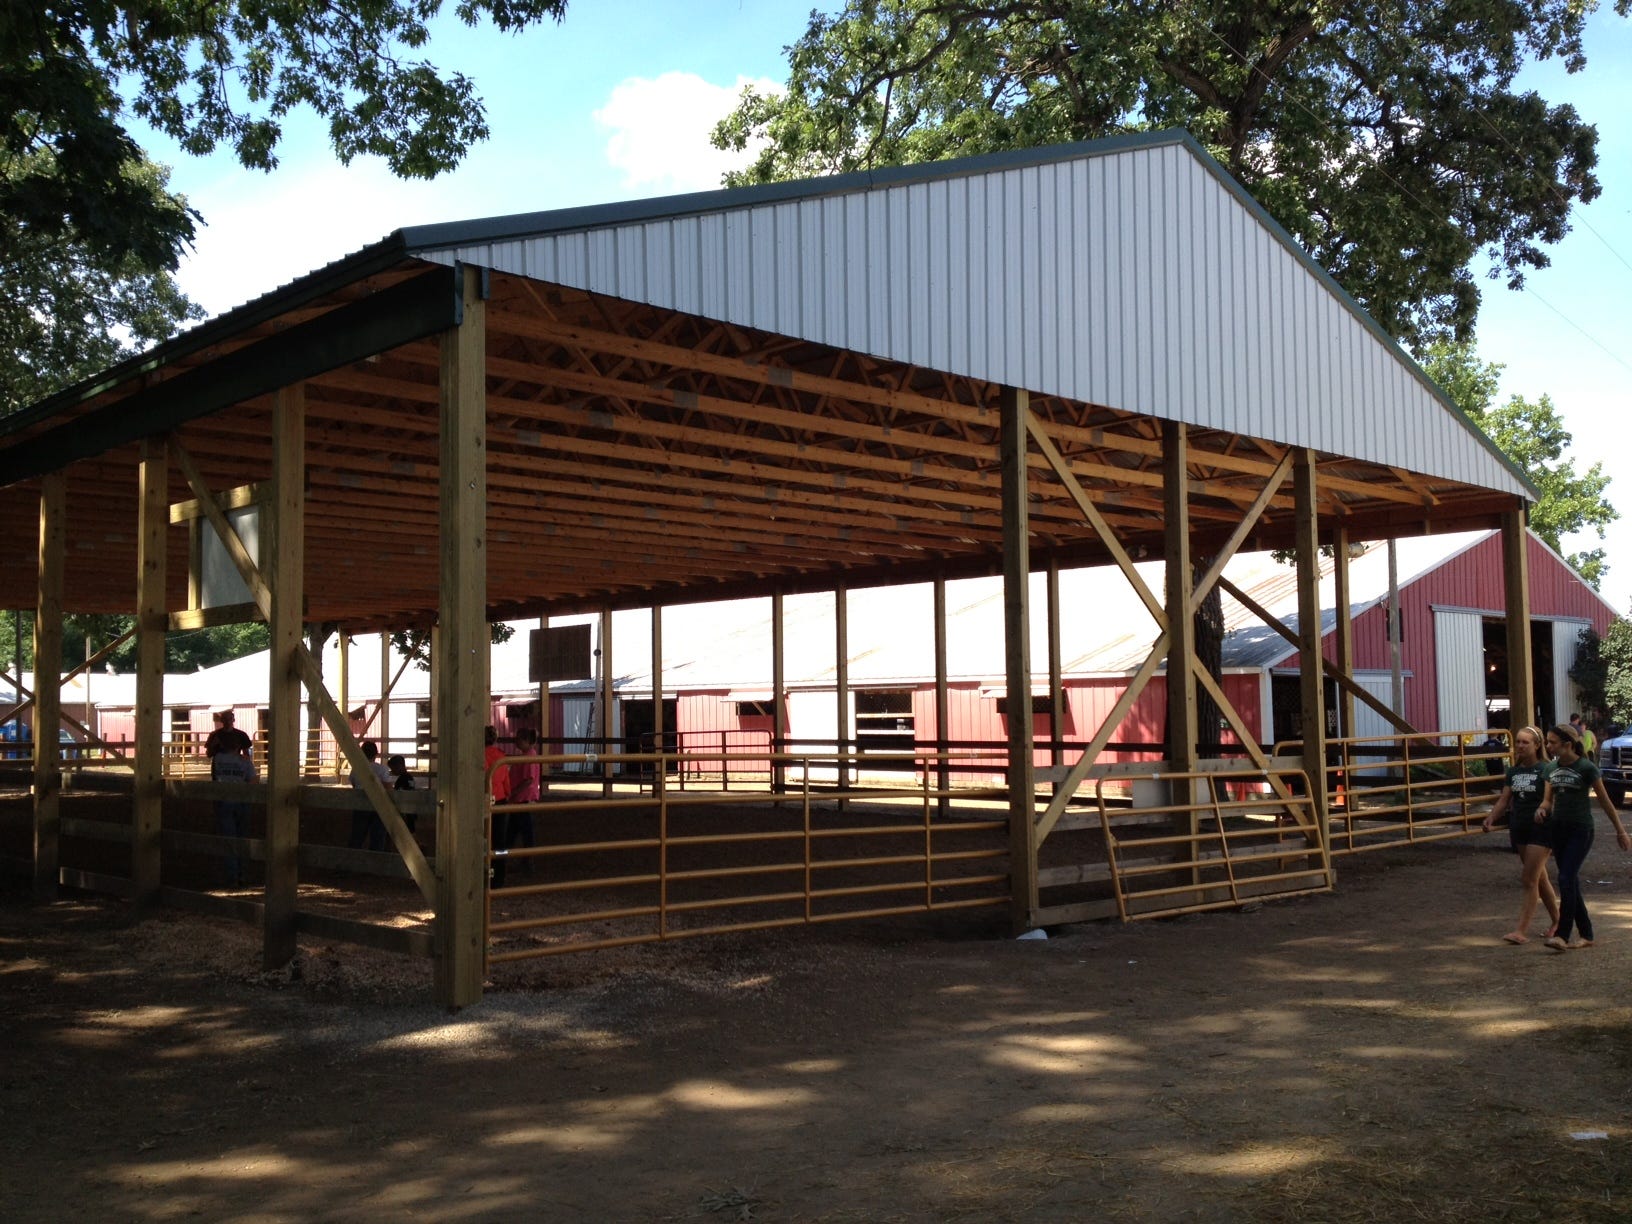 MDARD announces grant opportunities for county fairs Michigan Farm News